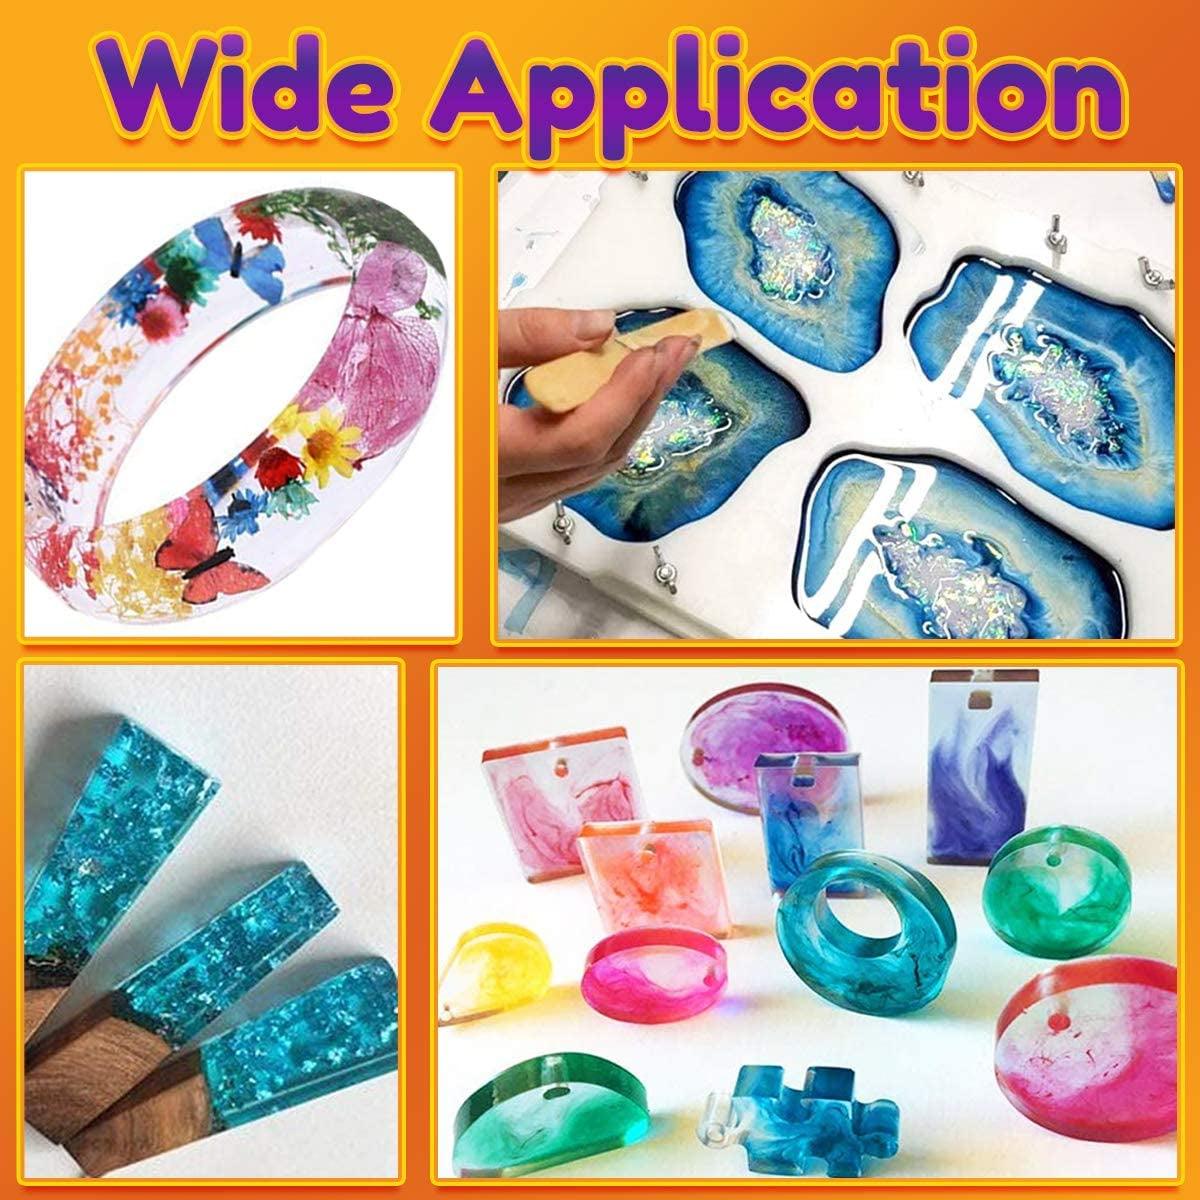 Craft It Up Epoxy Resin Kit for Beginners - Jewerly Making Kit for Kids and  Adults - All in One Craft Set with Molds, Charms, Dyes, Dry Flowers 